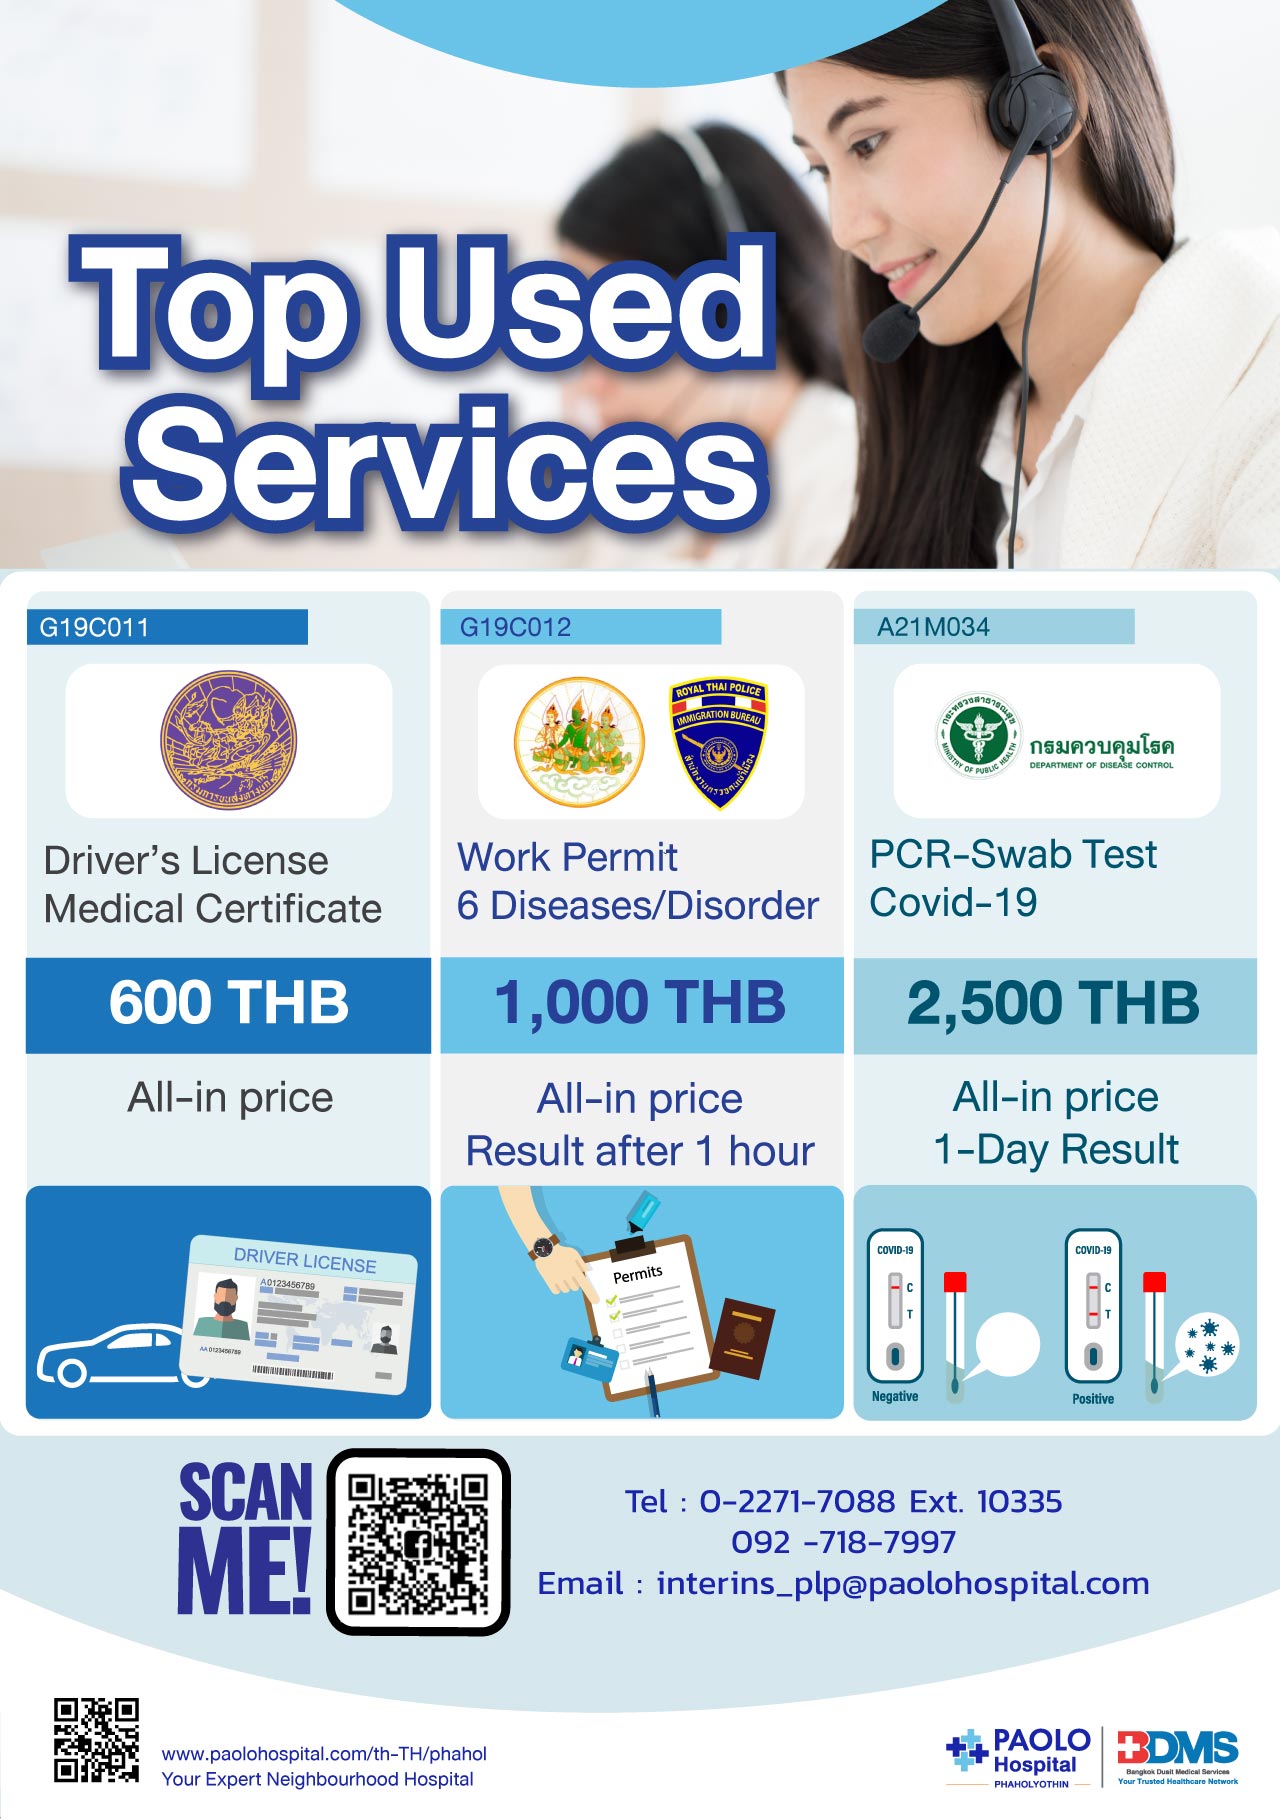 Top Used Services